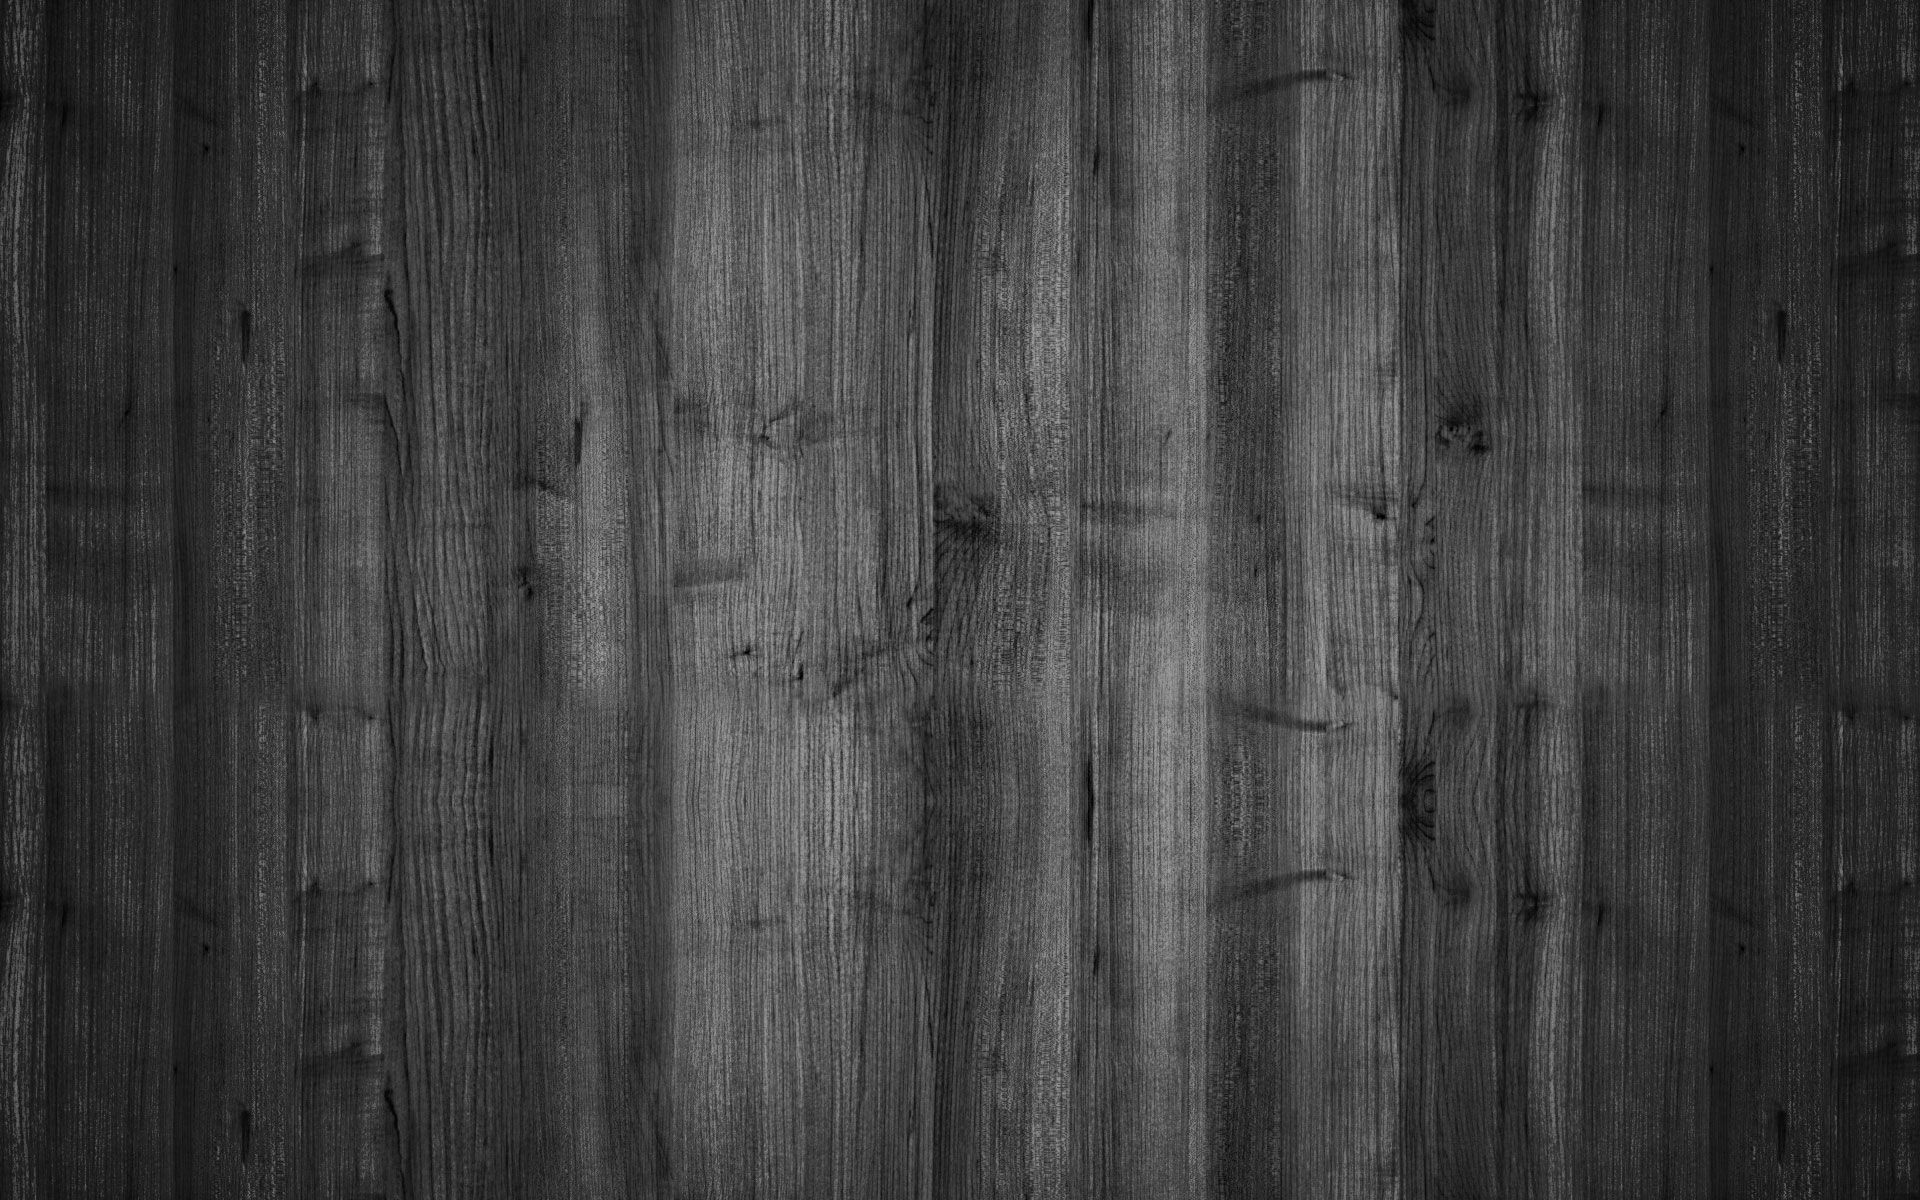 Wood Grain Wallpaper HD Posted By Ethan Tremblay